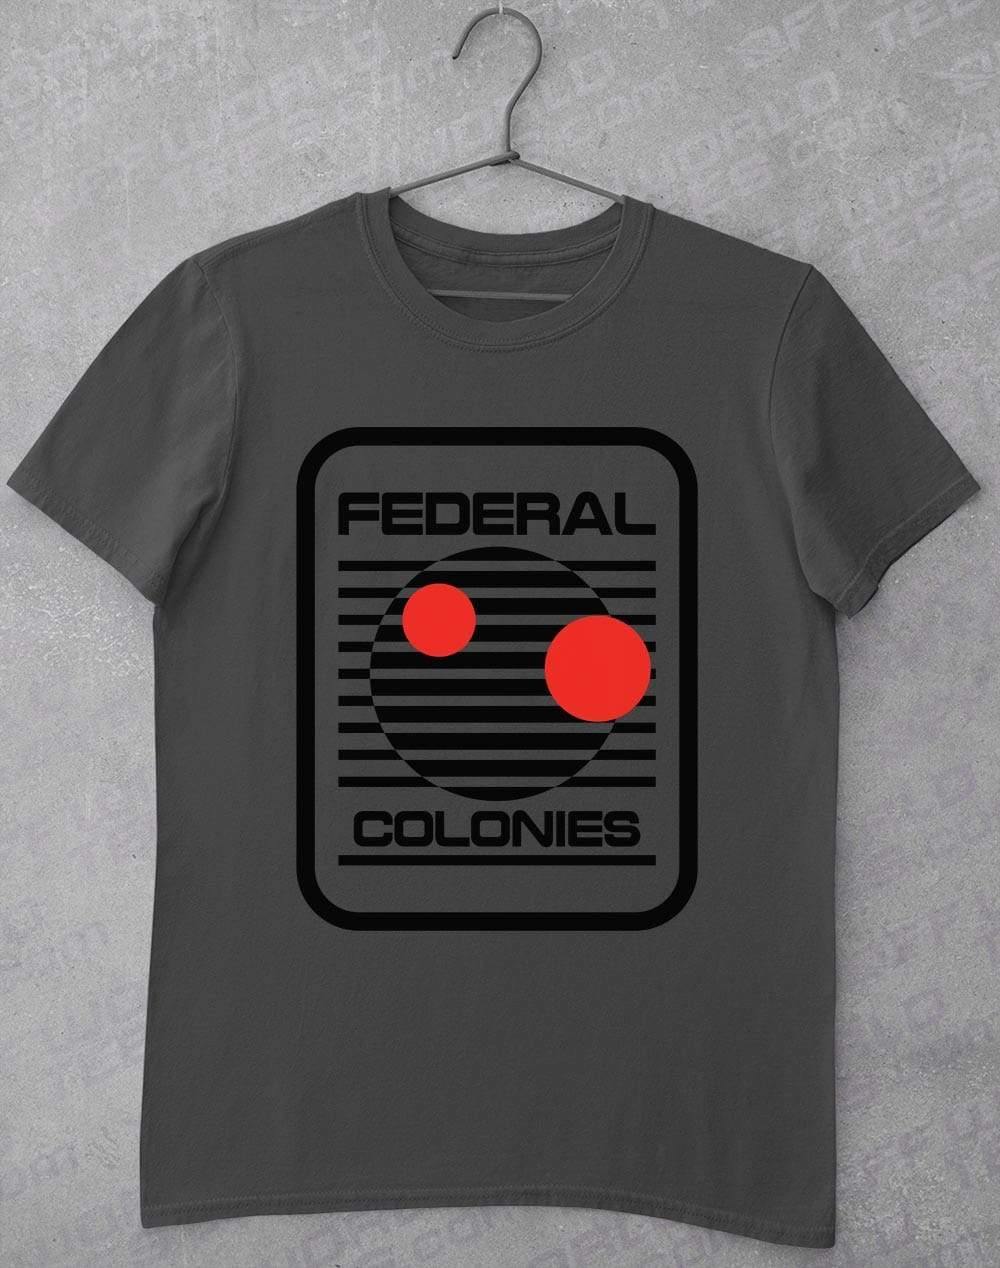 Federal Colonies T-Shirt S / Charcoal  - Off World Tees